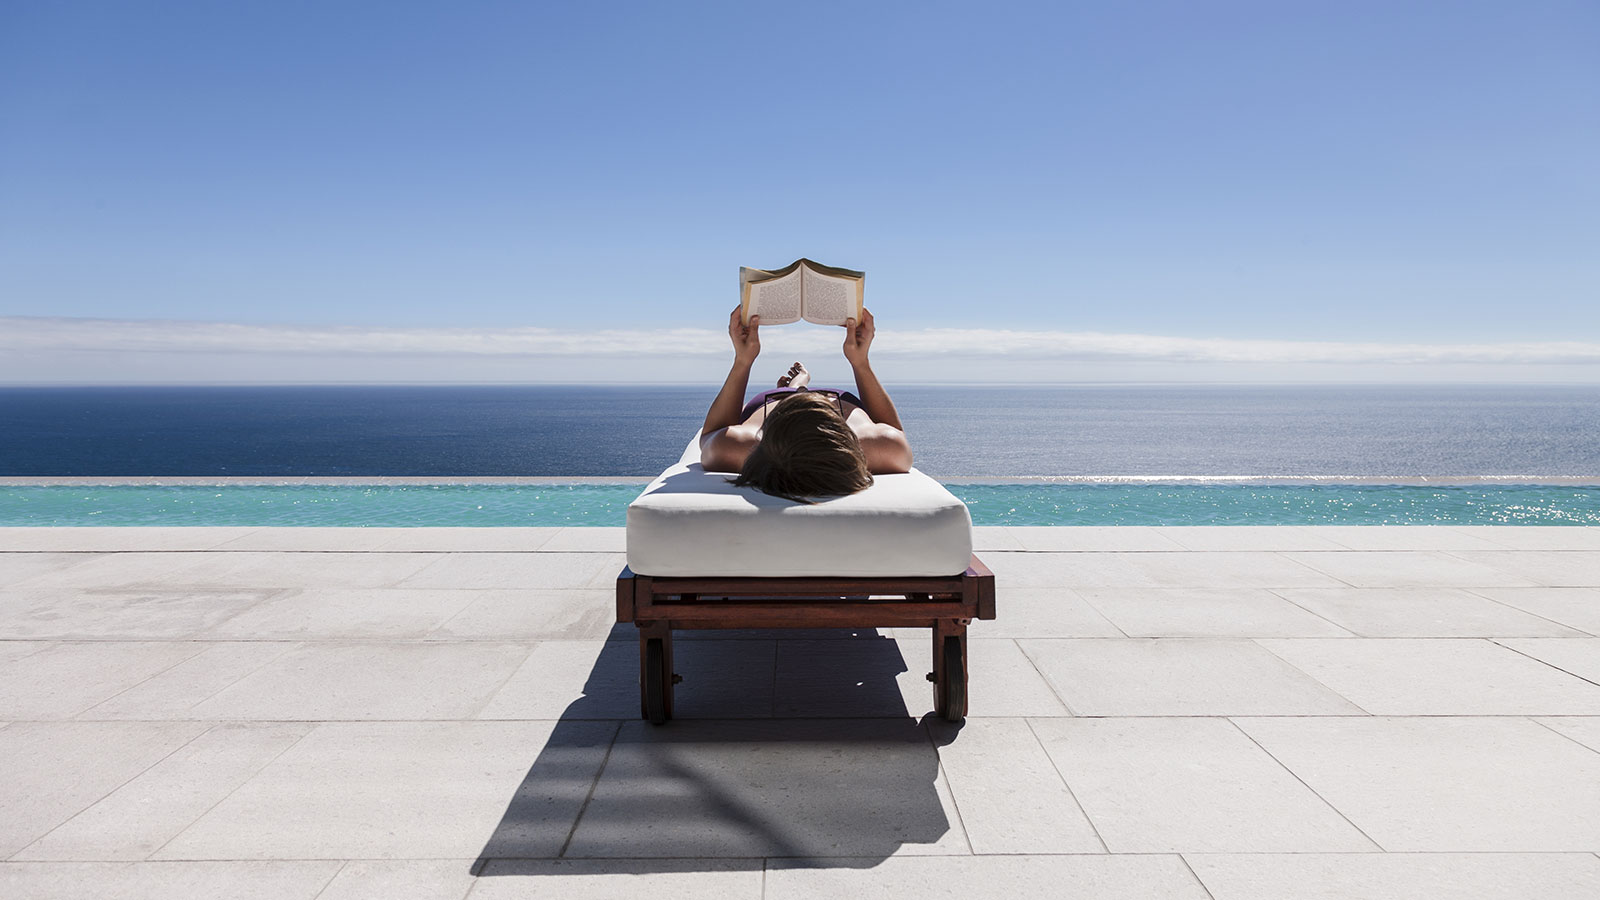 A woman reading a book while reclining on a lounge chair overlooking the beach.